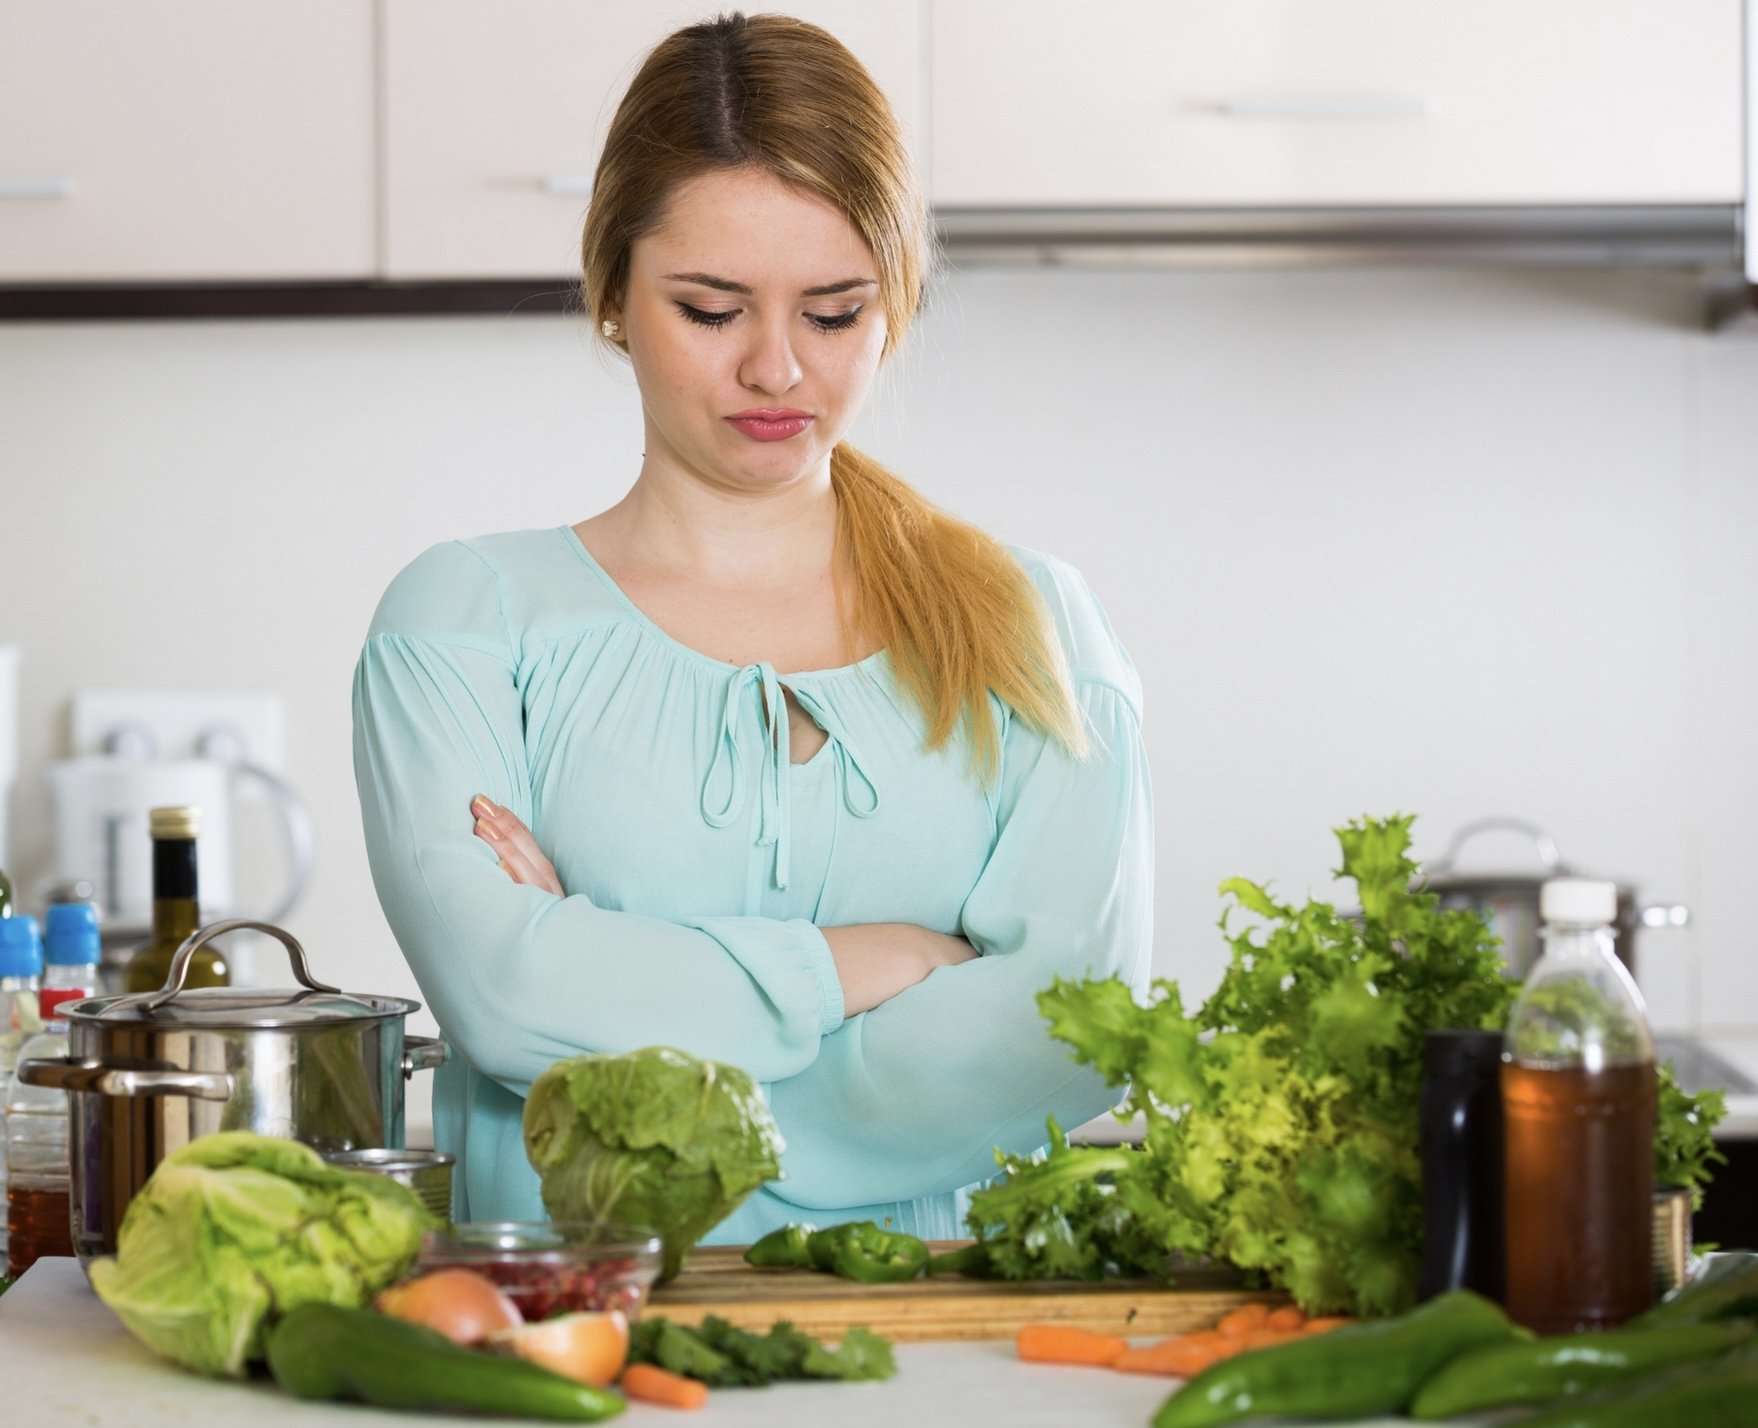 Blonde girl with crossed arms staring at produce on her kitchen counter displeased